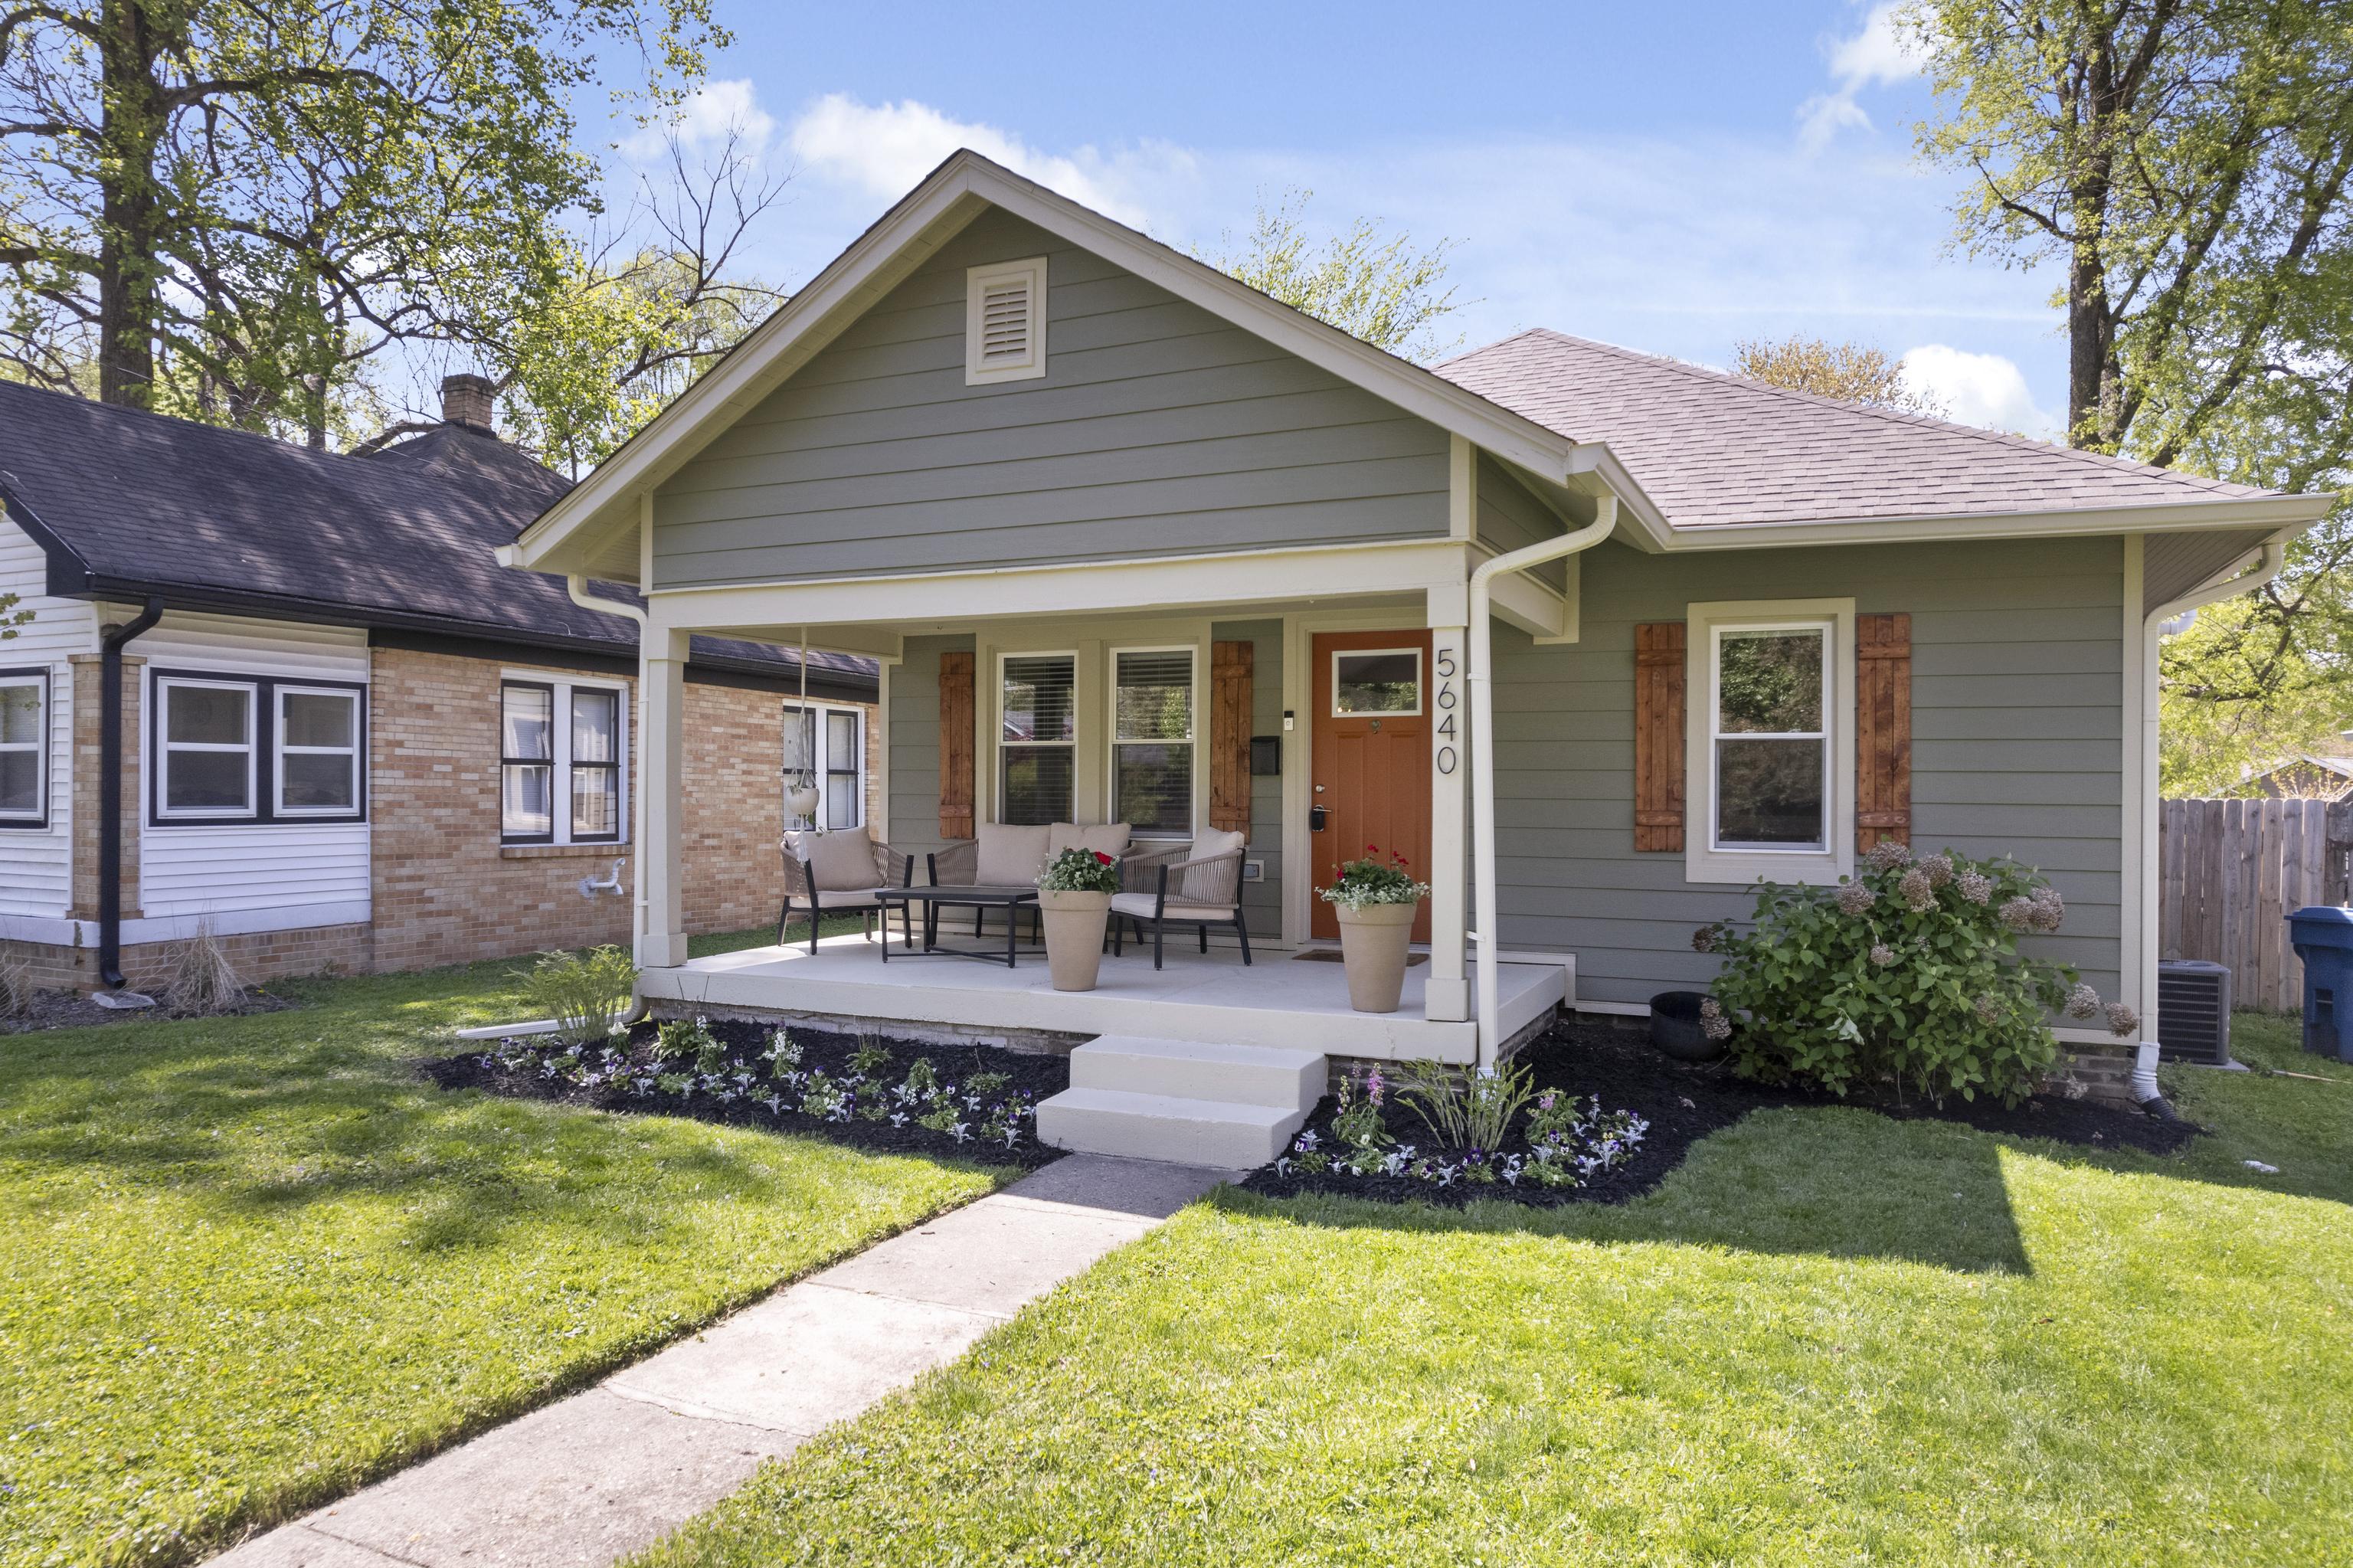 Photo one of 5640 Winthrop Ave Indianapolis IN 46220 | MLS 21965638